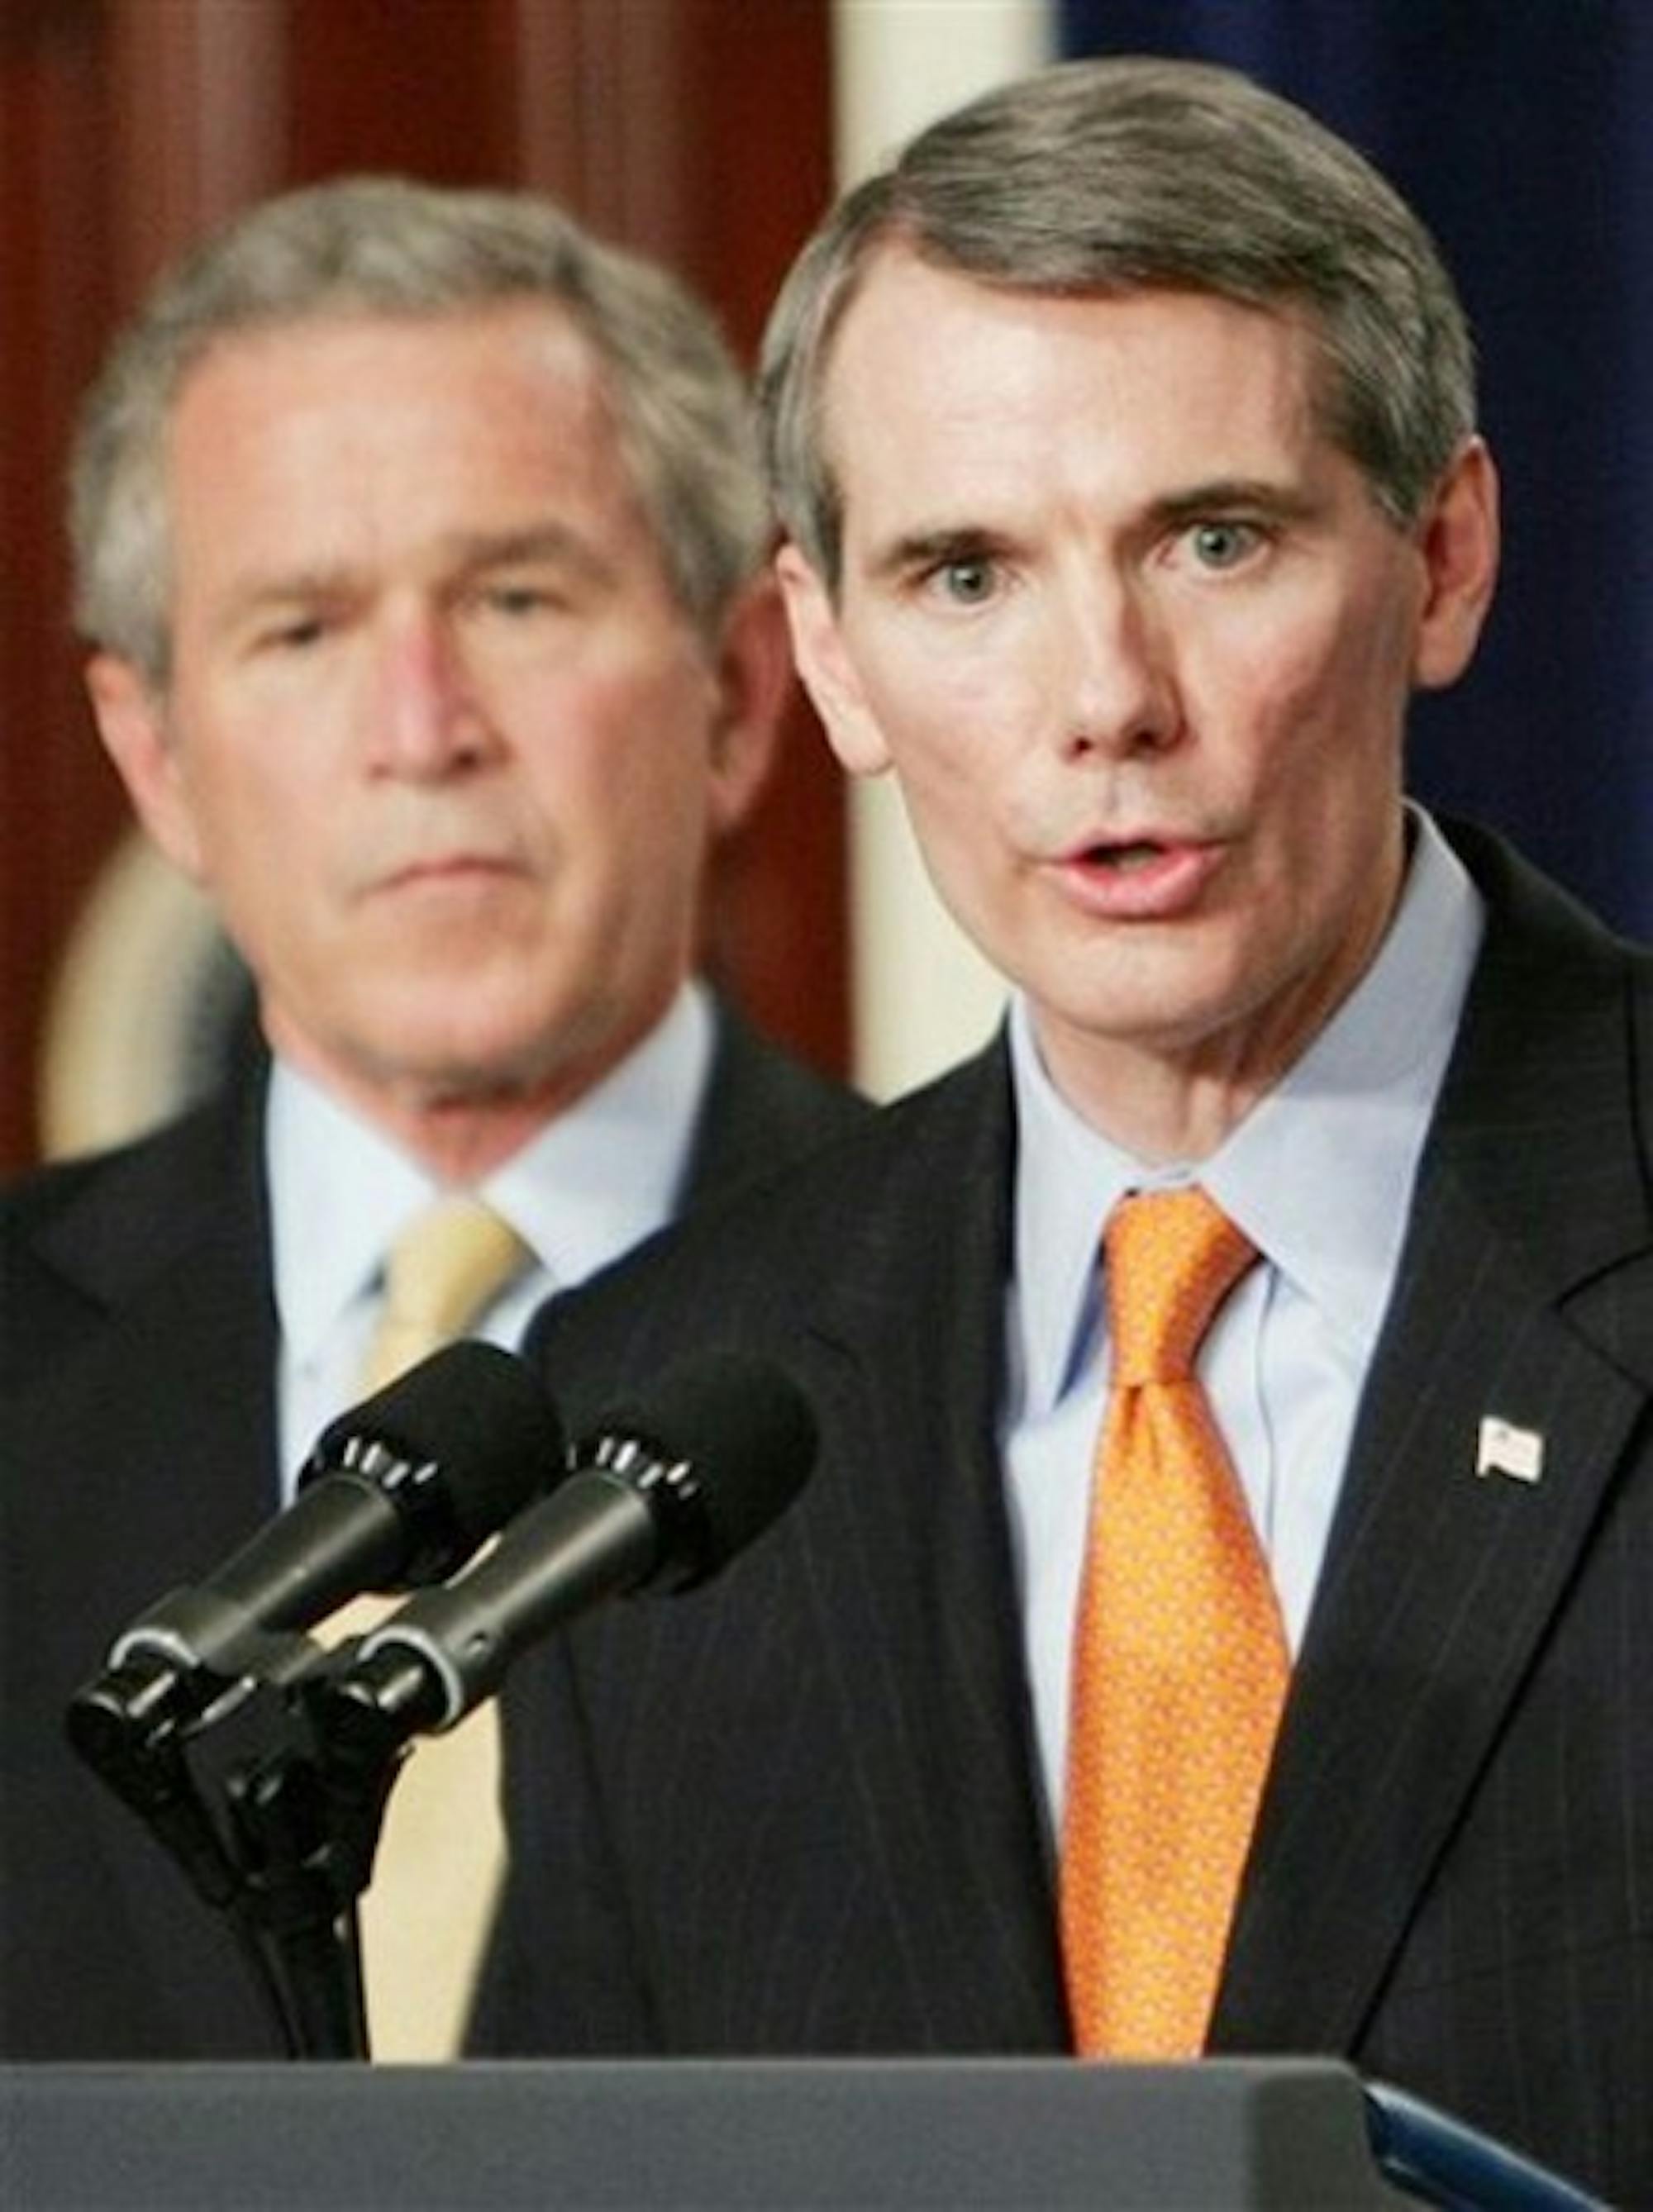 The U.S. Senate confirmed Dartmouth graduate Rob Portman '78 to direct the President Bush's Office of Management and Budget.